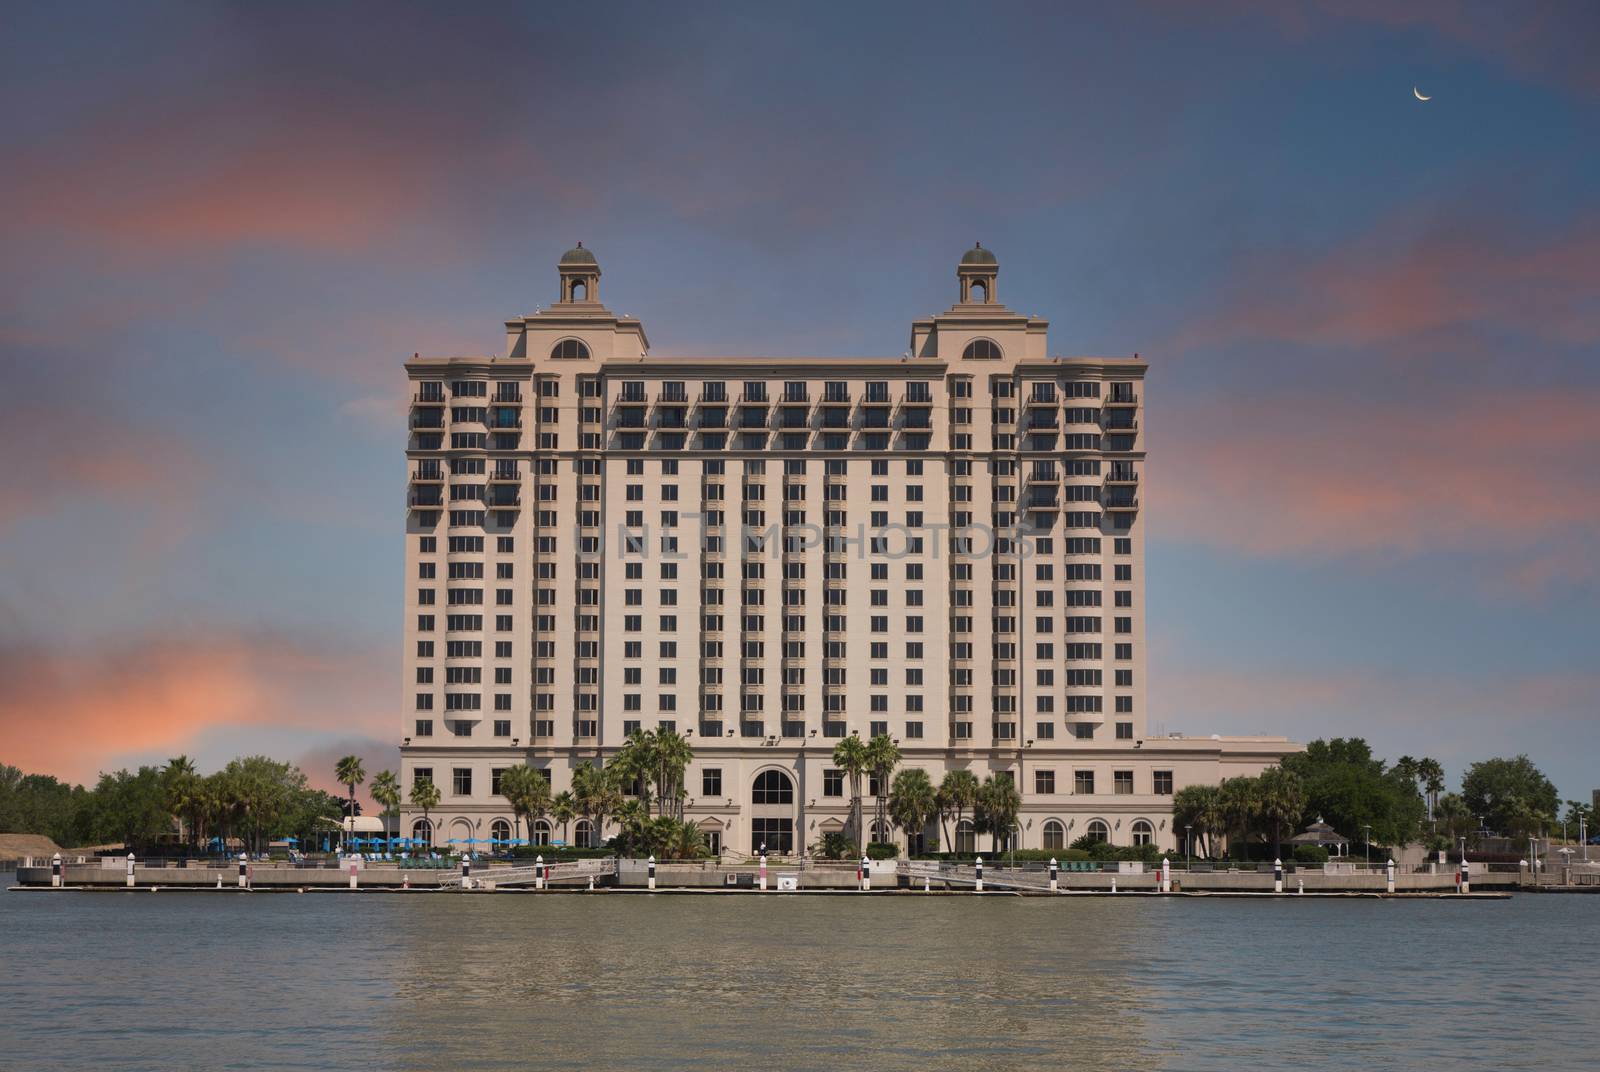 The hotel across the Savannah River from River street next to the Convention Center